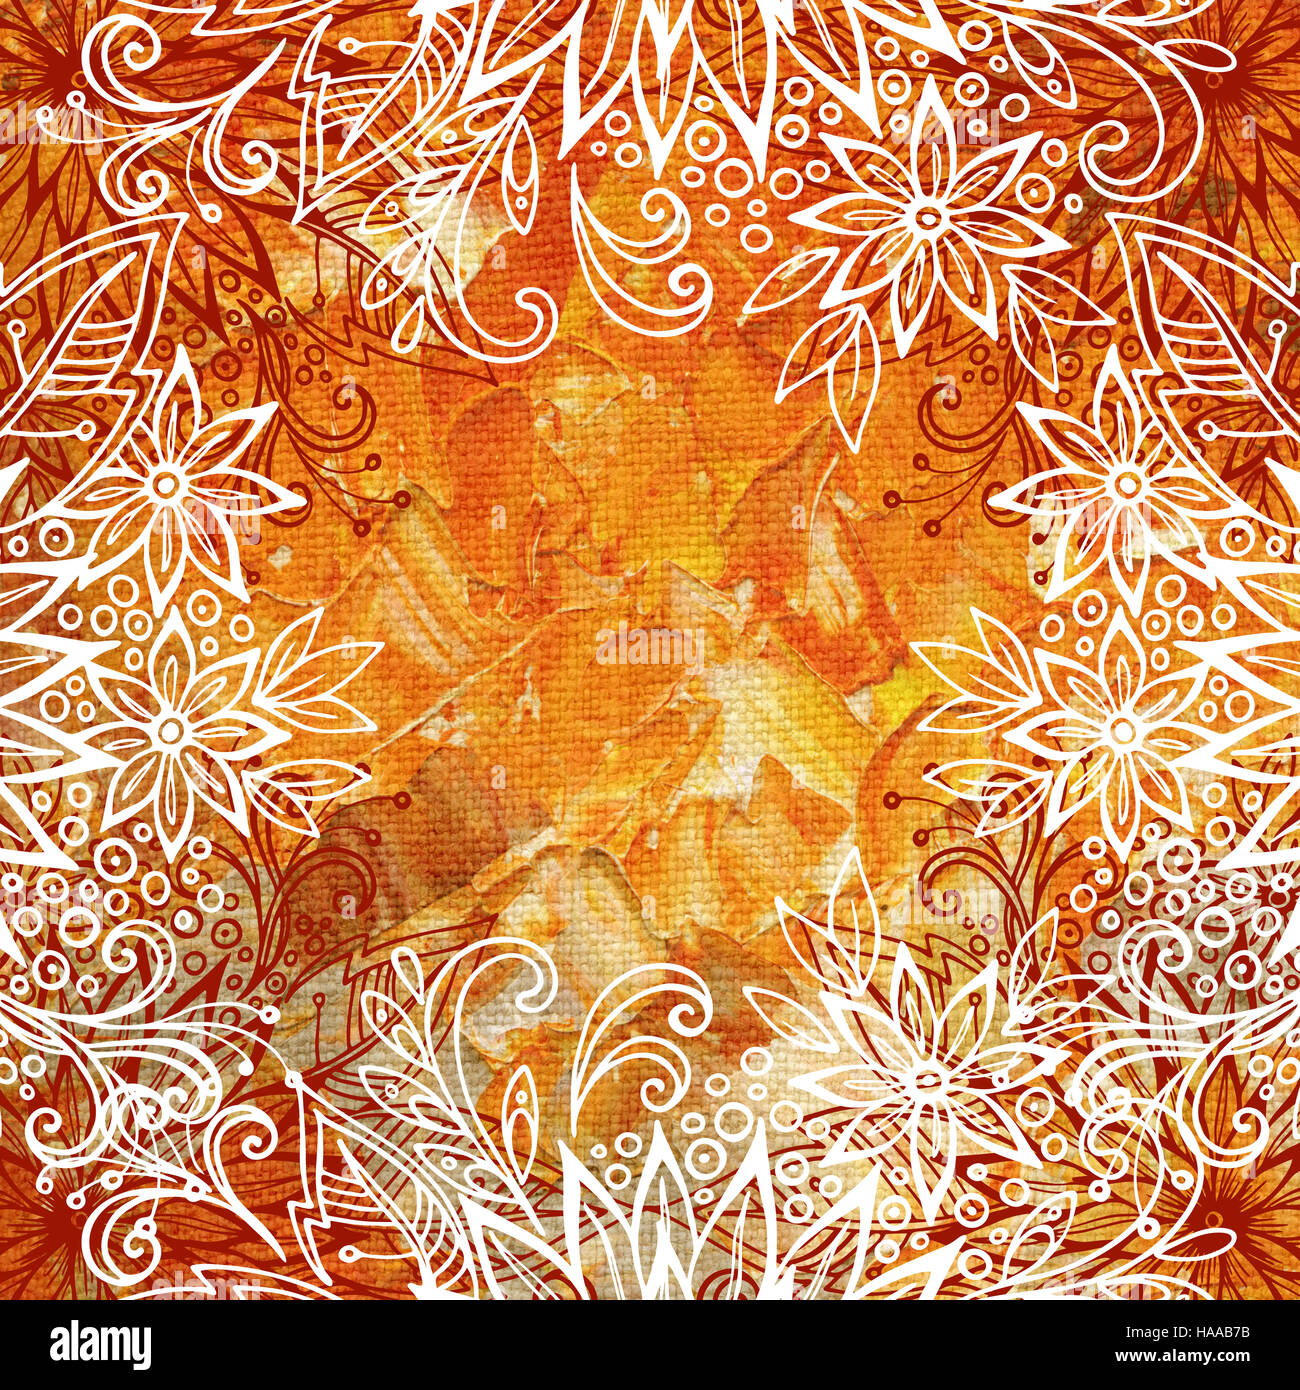 Floral Pattern on Oil Paint Painting Stock Photo